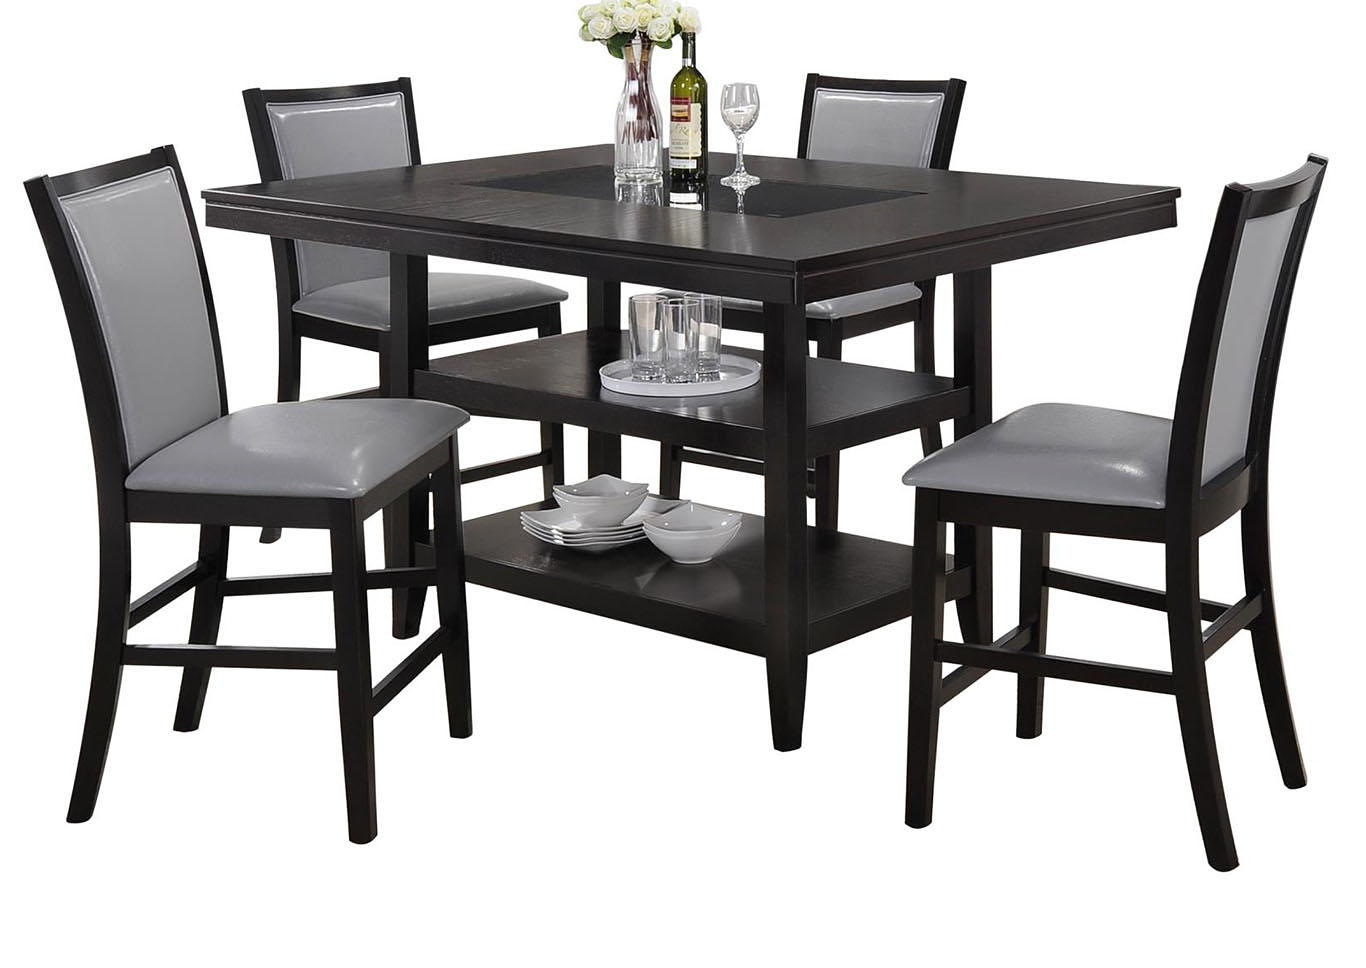 Grazia Black Counter Height Table The Furniture Outlet Ny